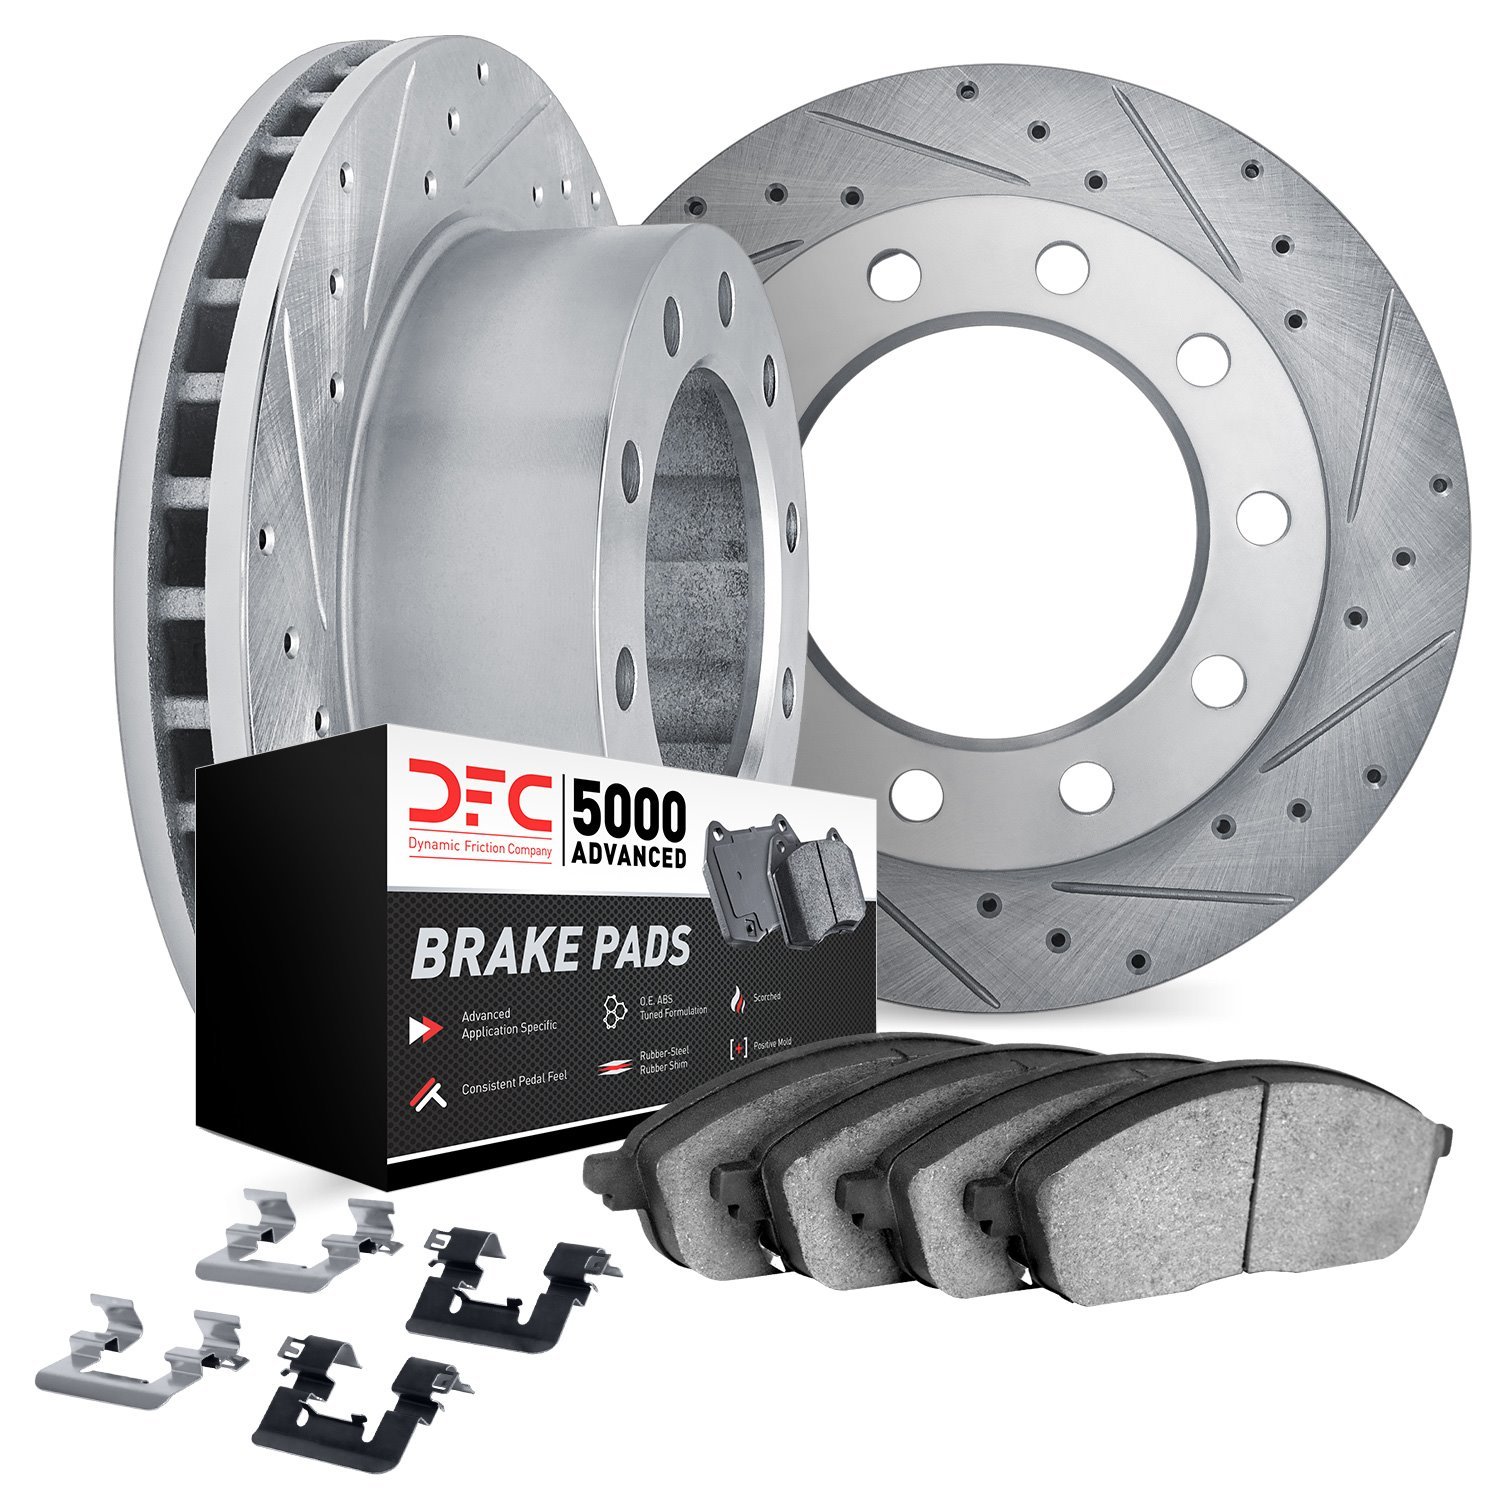 7512-99759 Drilled/Slotted Brake Rotors w/5000 Advanced Brake Pads Kit & Hardware [Silver], Fits Select Ford/Lincoln/Mercury/Maz